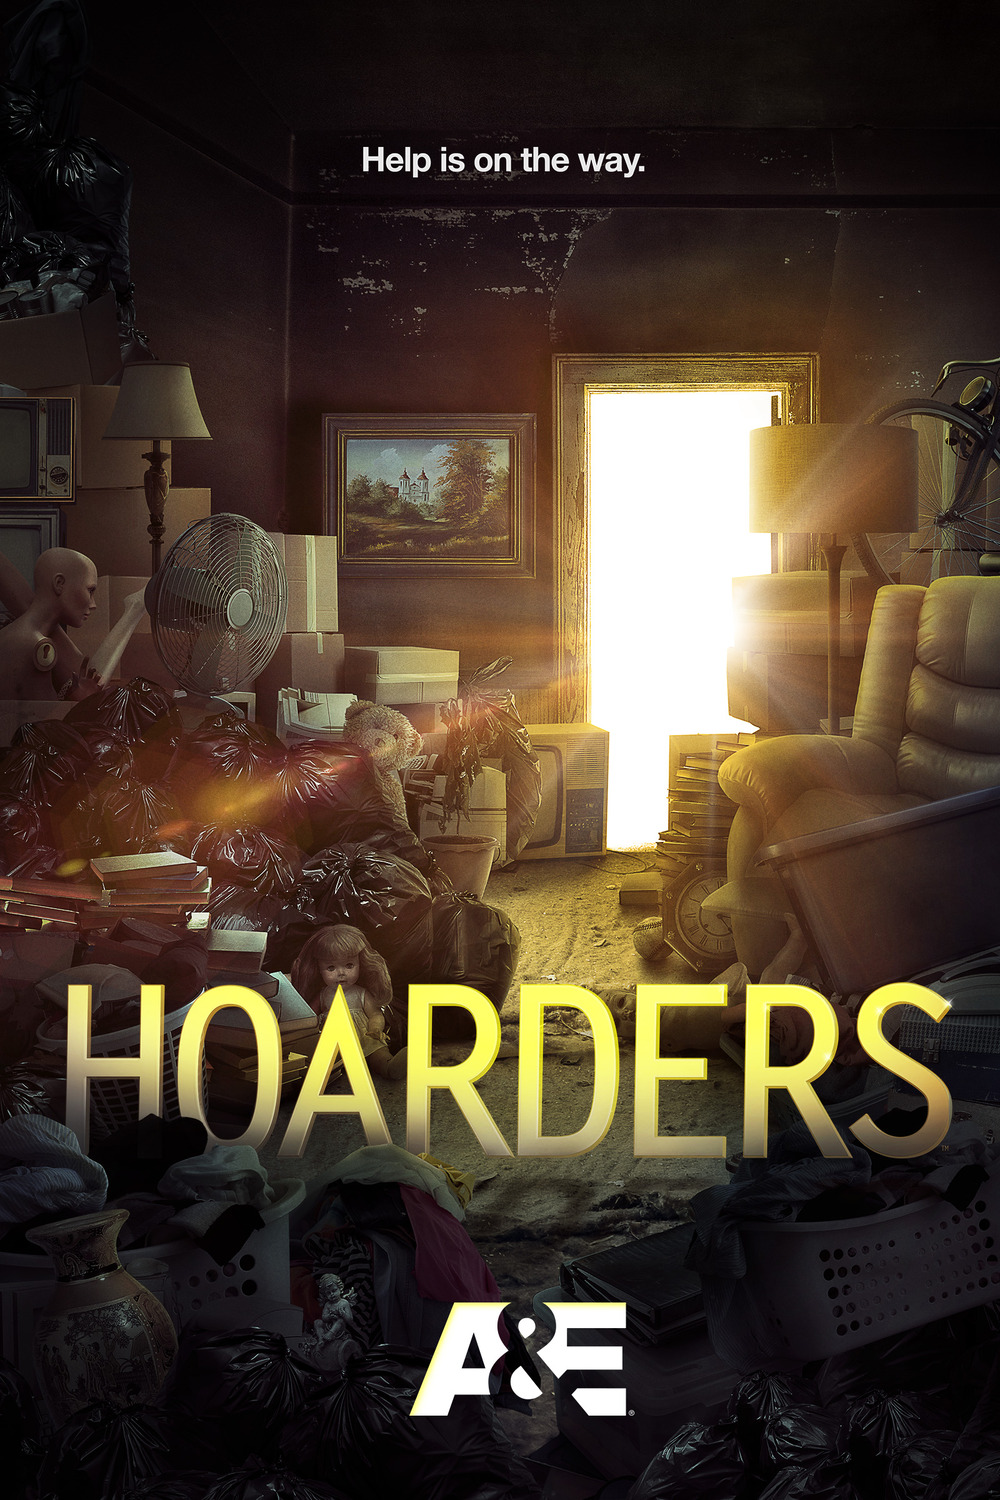 Extra Large Movie Poster Image for Hoarders (#5 of 5)